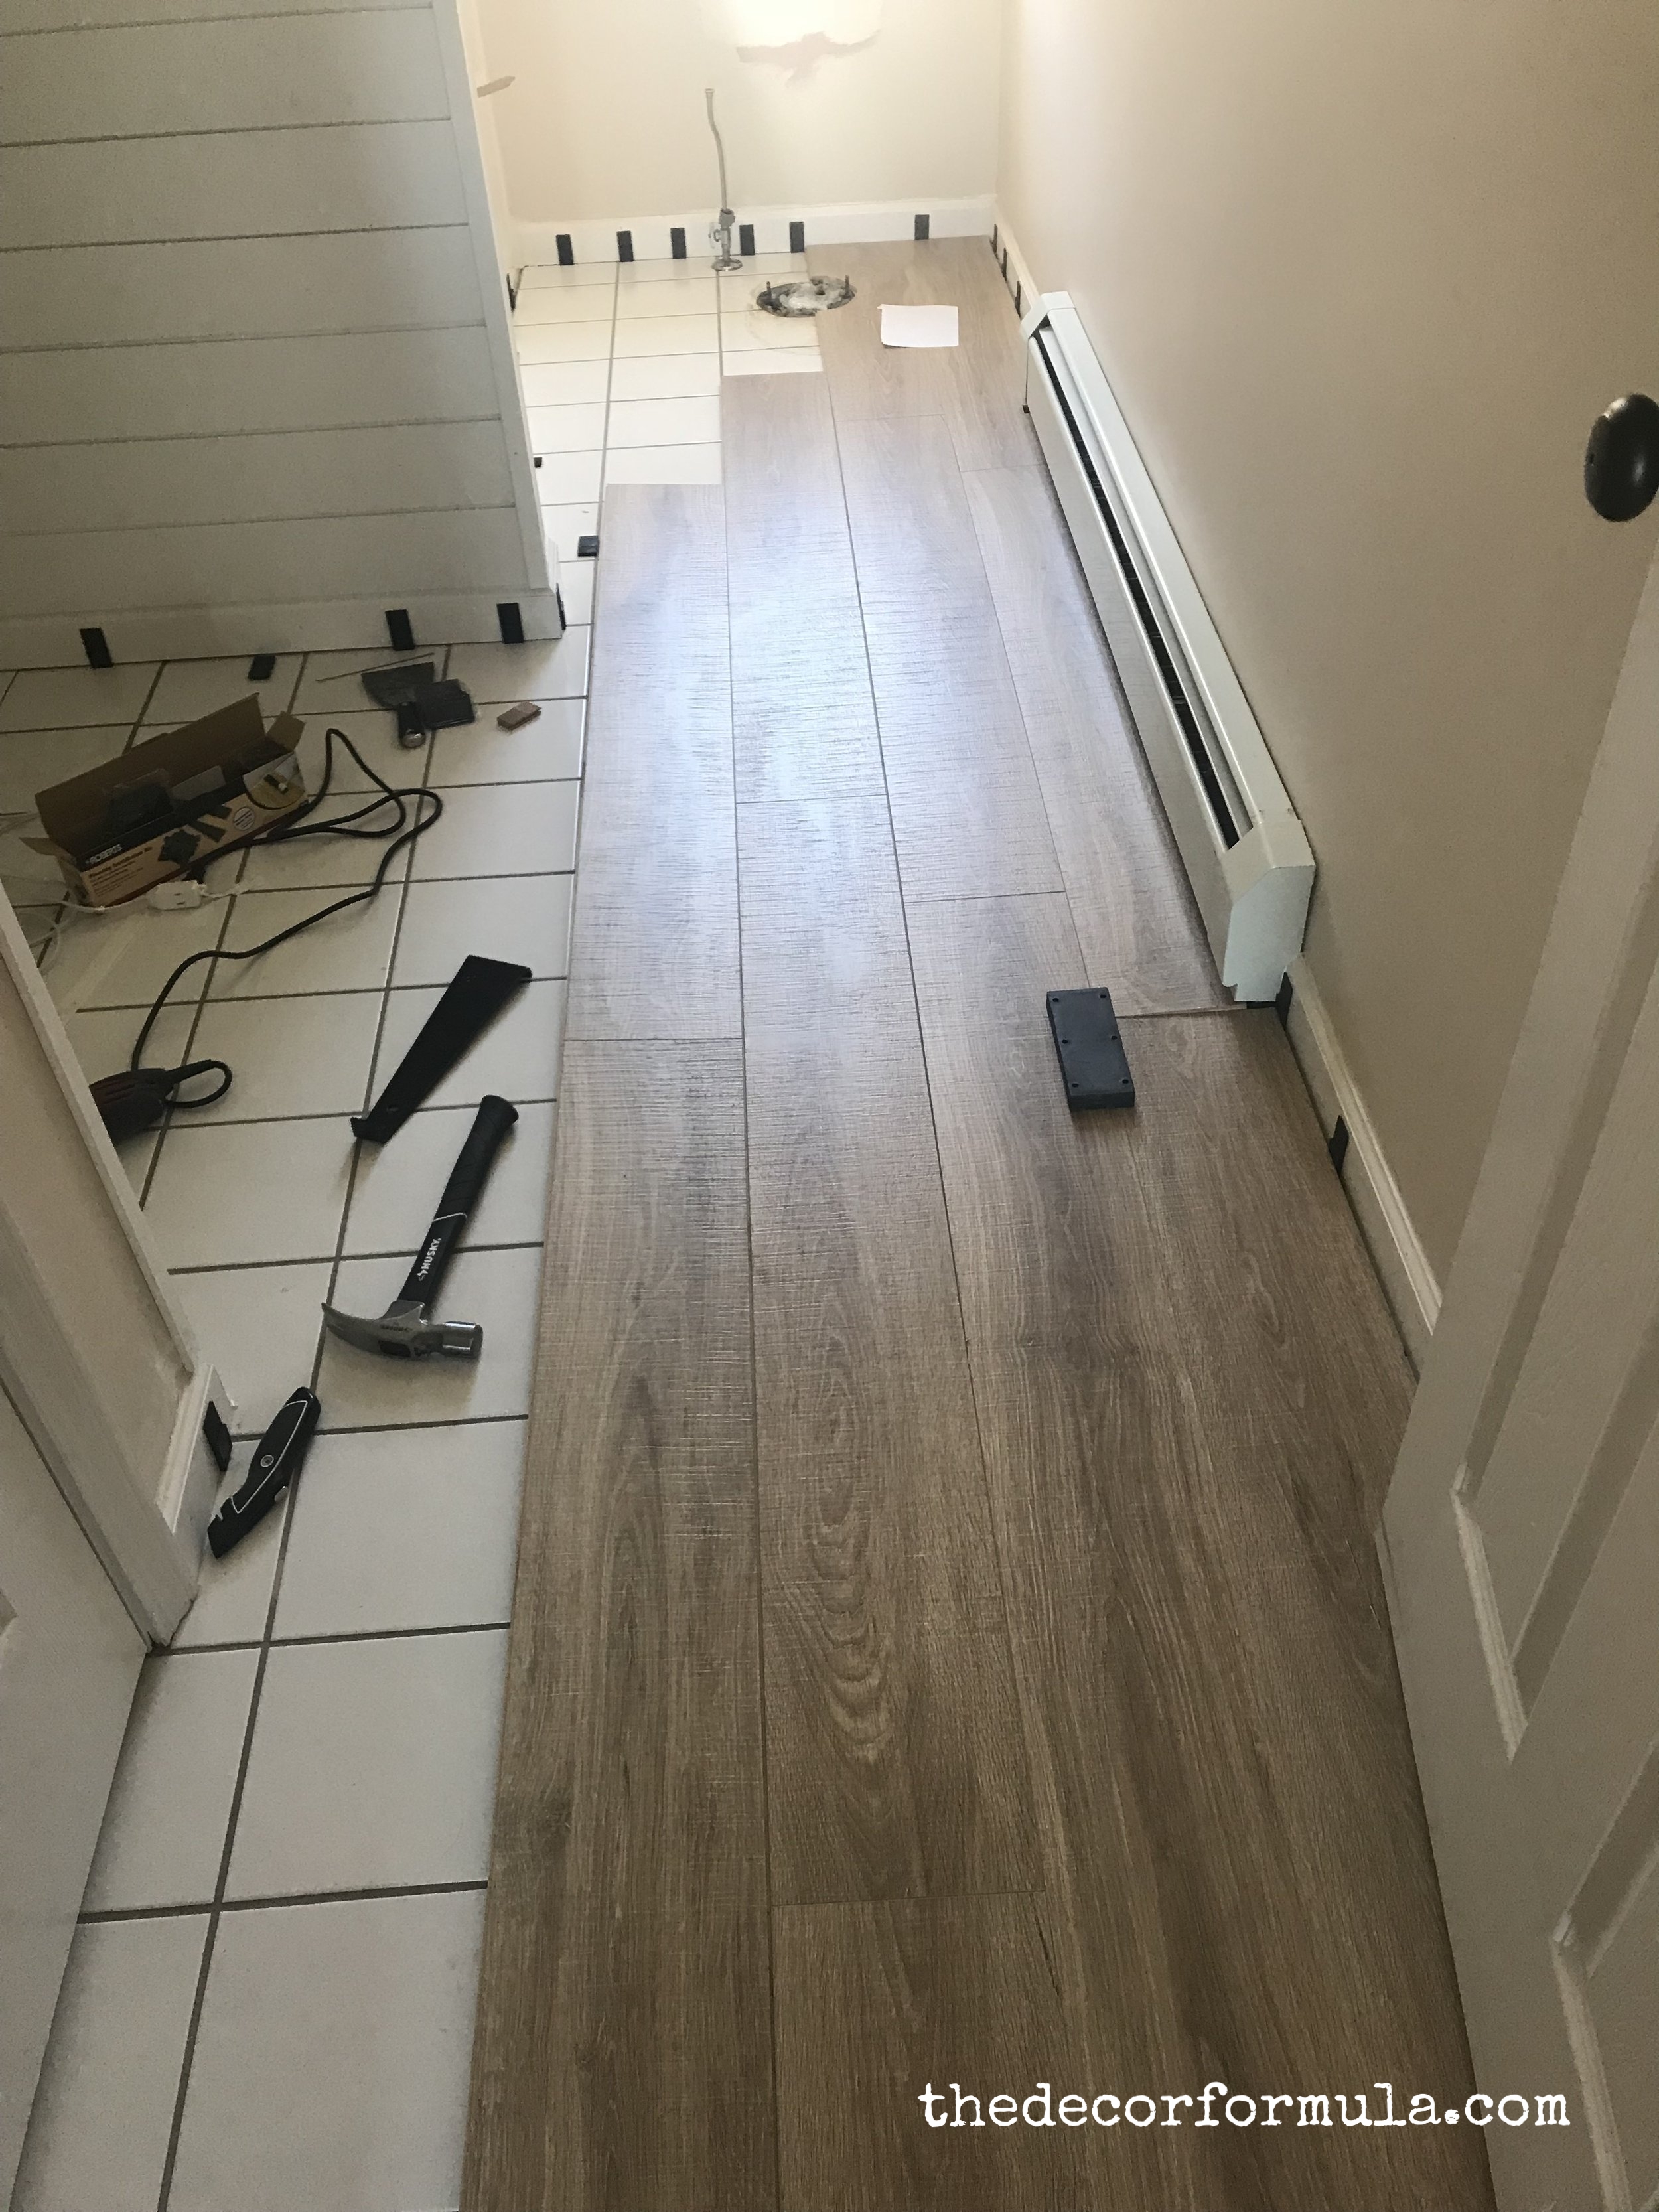 Ideas For Covering Up Tile Floors, Laying Laminate Flooring Over Tiles